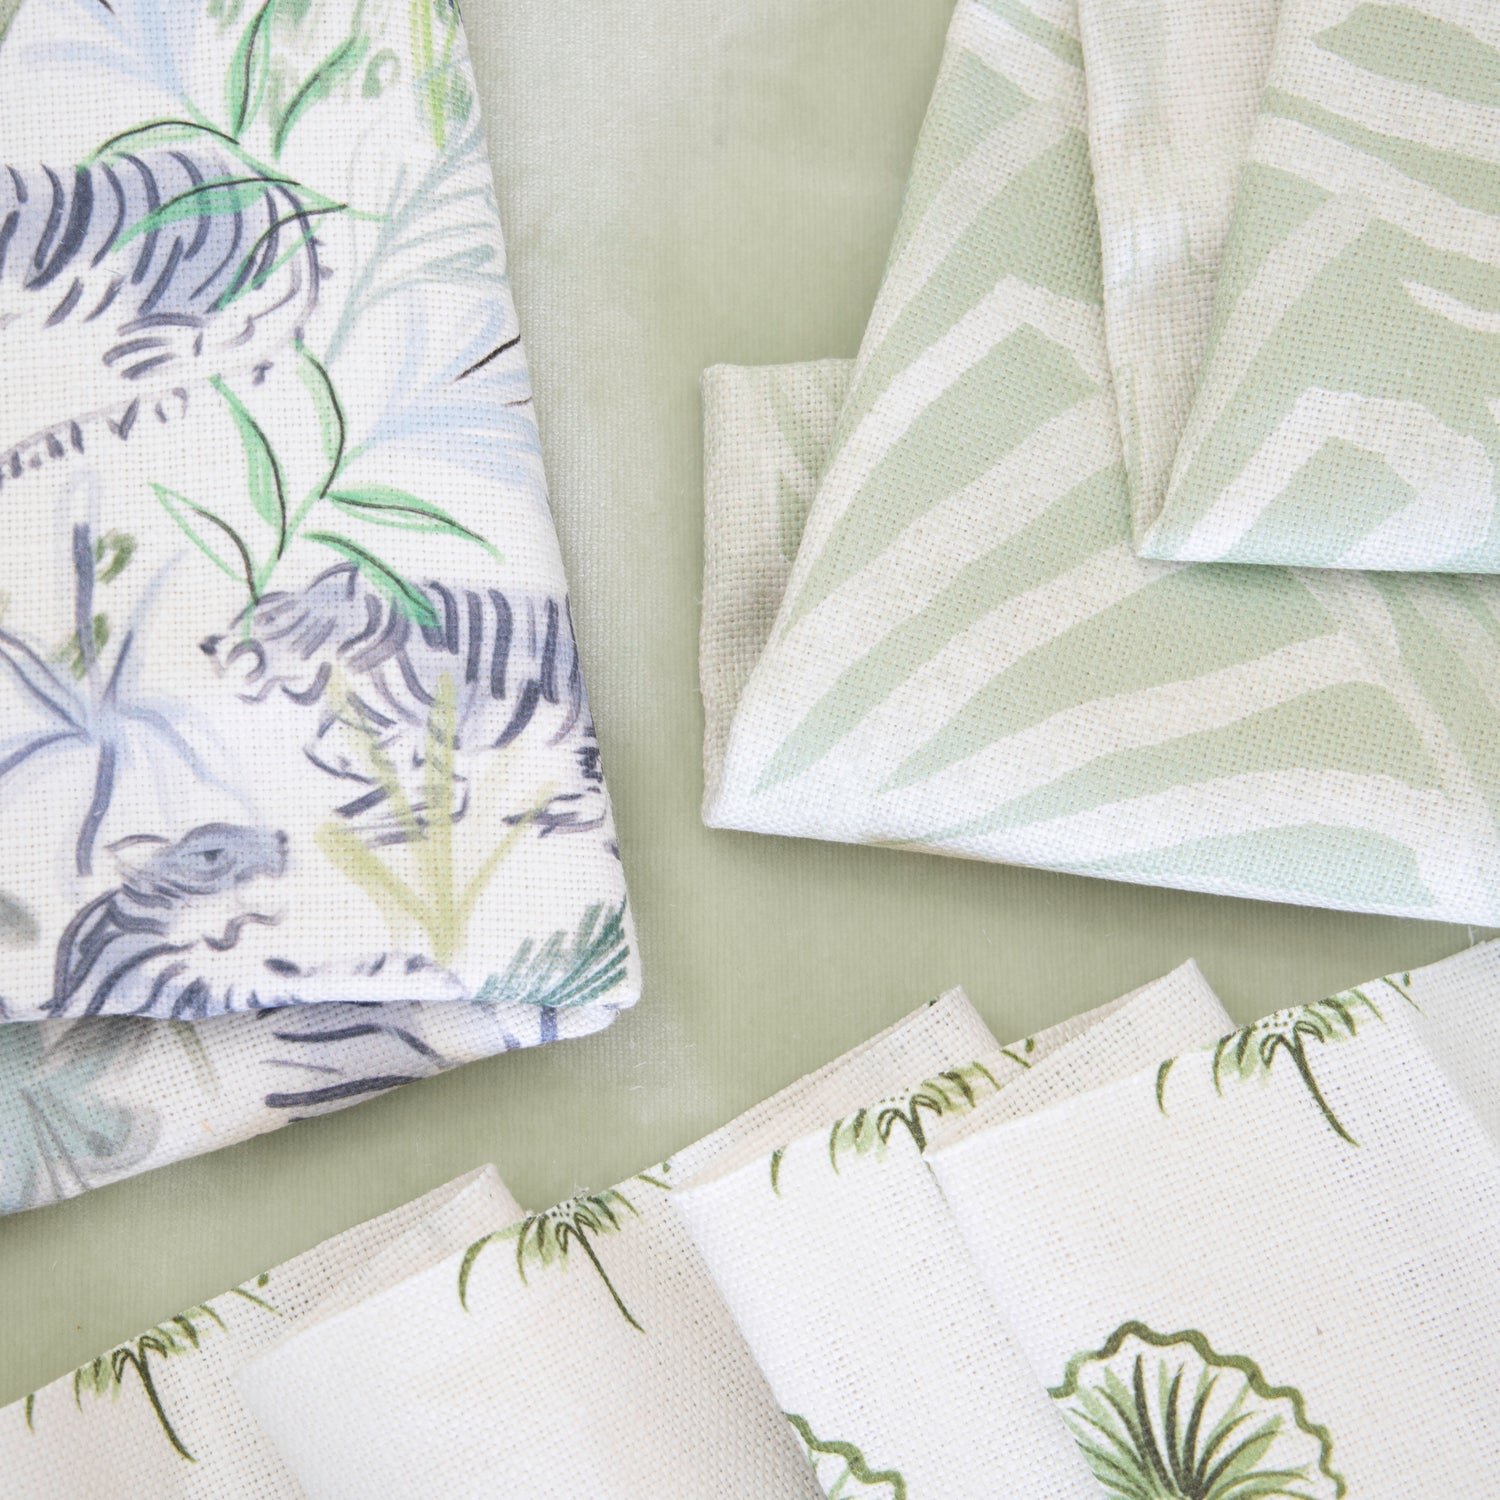 Interior design moodboard and fabric inspirations close-up with Green Tiger Printed Linen Swatch, Green Floral Printed Linen Swatch, and Sage Green Printed Linen Swatch